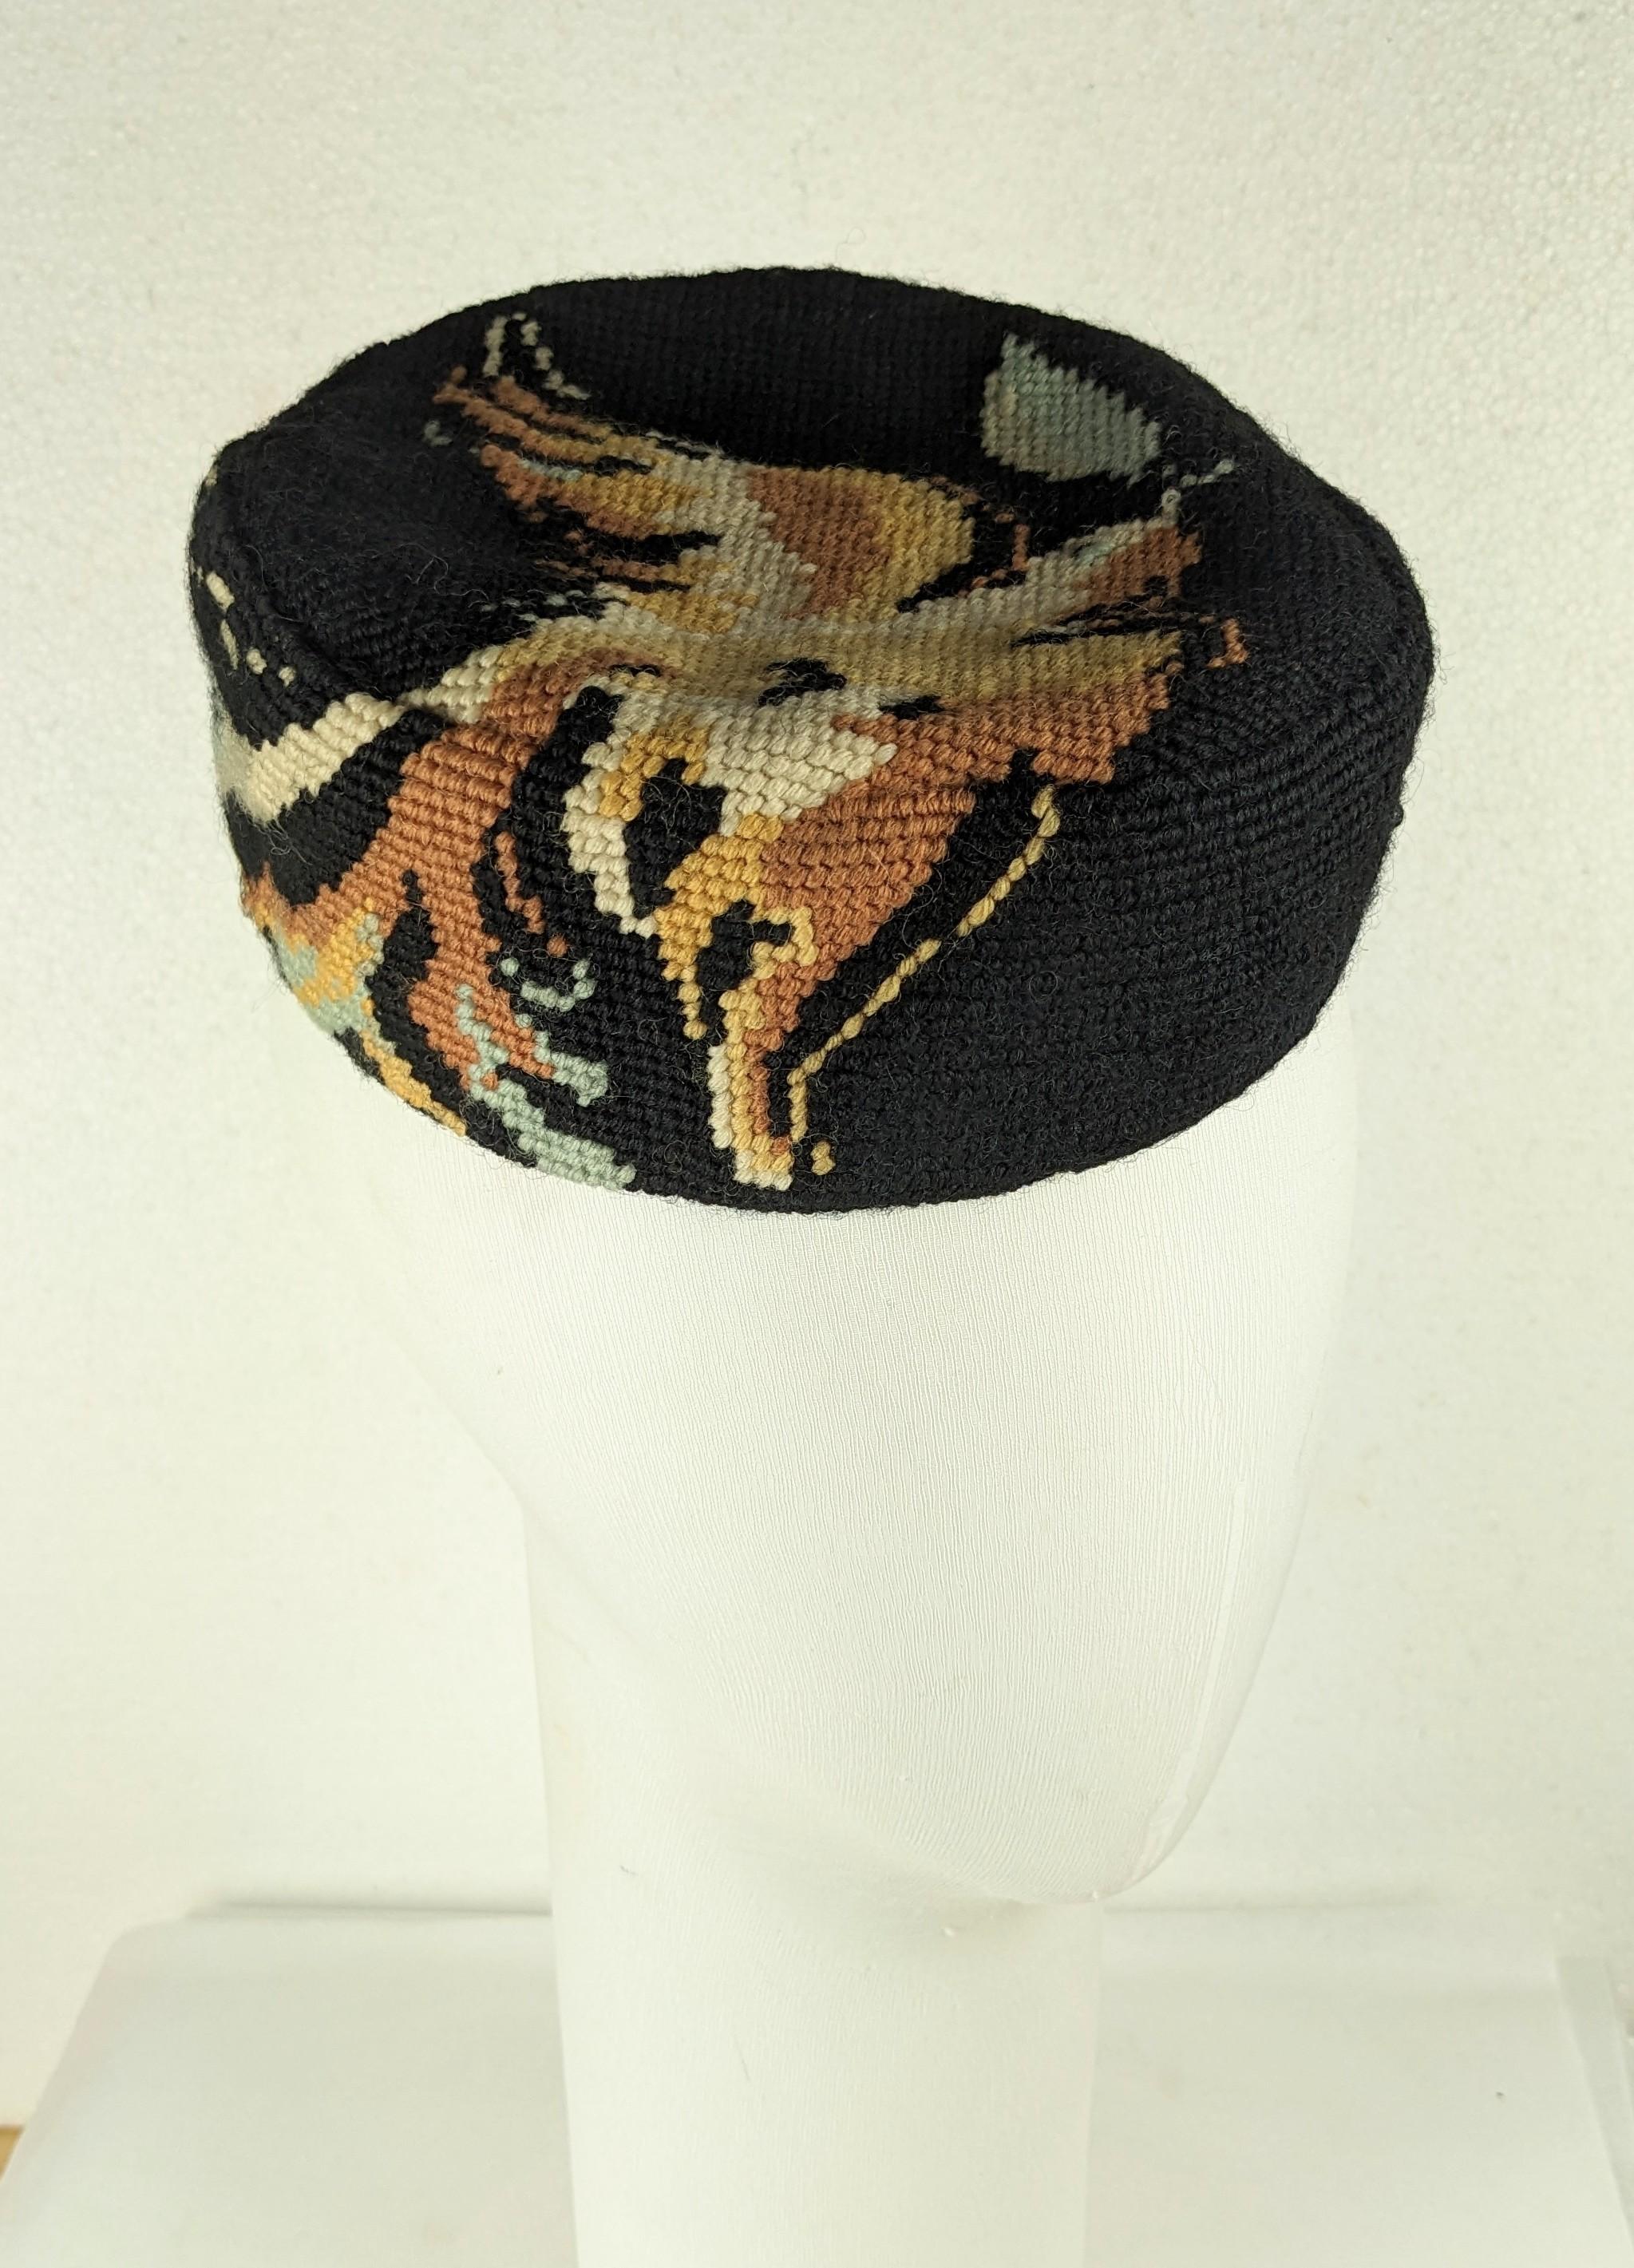 Marcel Vertes design hand cross stitched pillbox hat circa 1940. Of a flying dove with wings outstretched holding an olive leaf in its beak. Black background with the dove in ivory with autumnal color accents lined in black sateen. 1940's France.